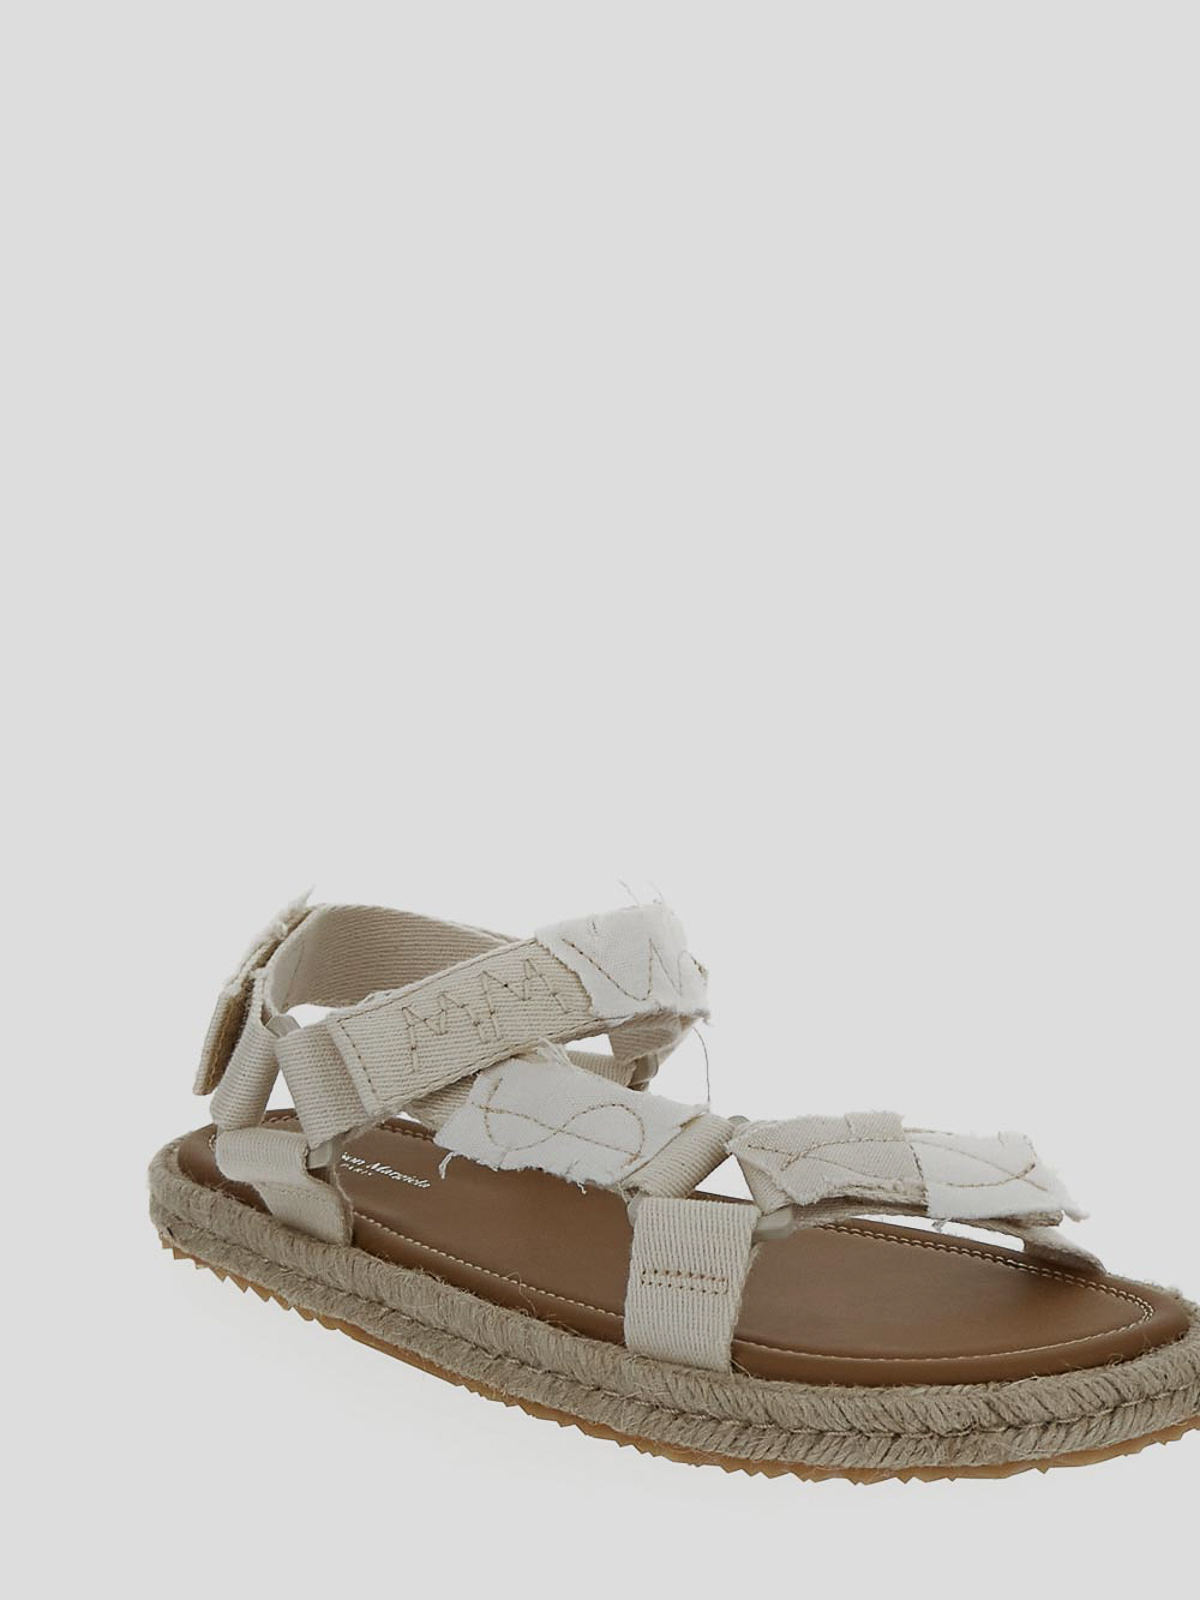 Inc 5 White Sandals - Buy Inc 5 White Sandals online in India